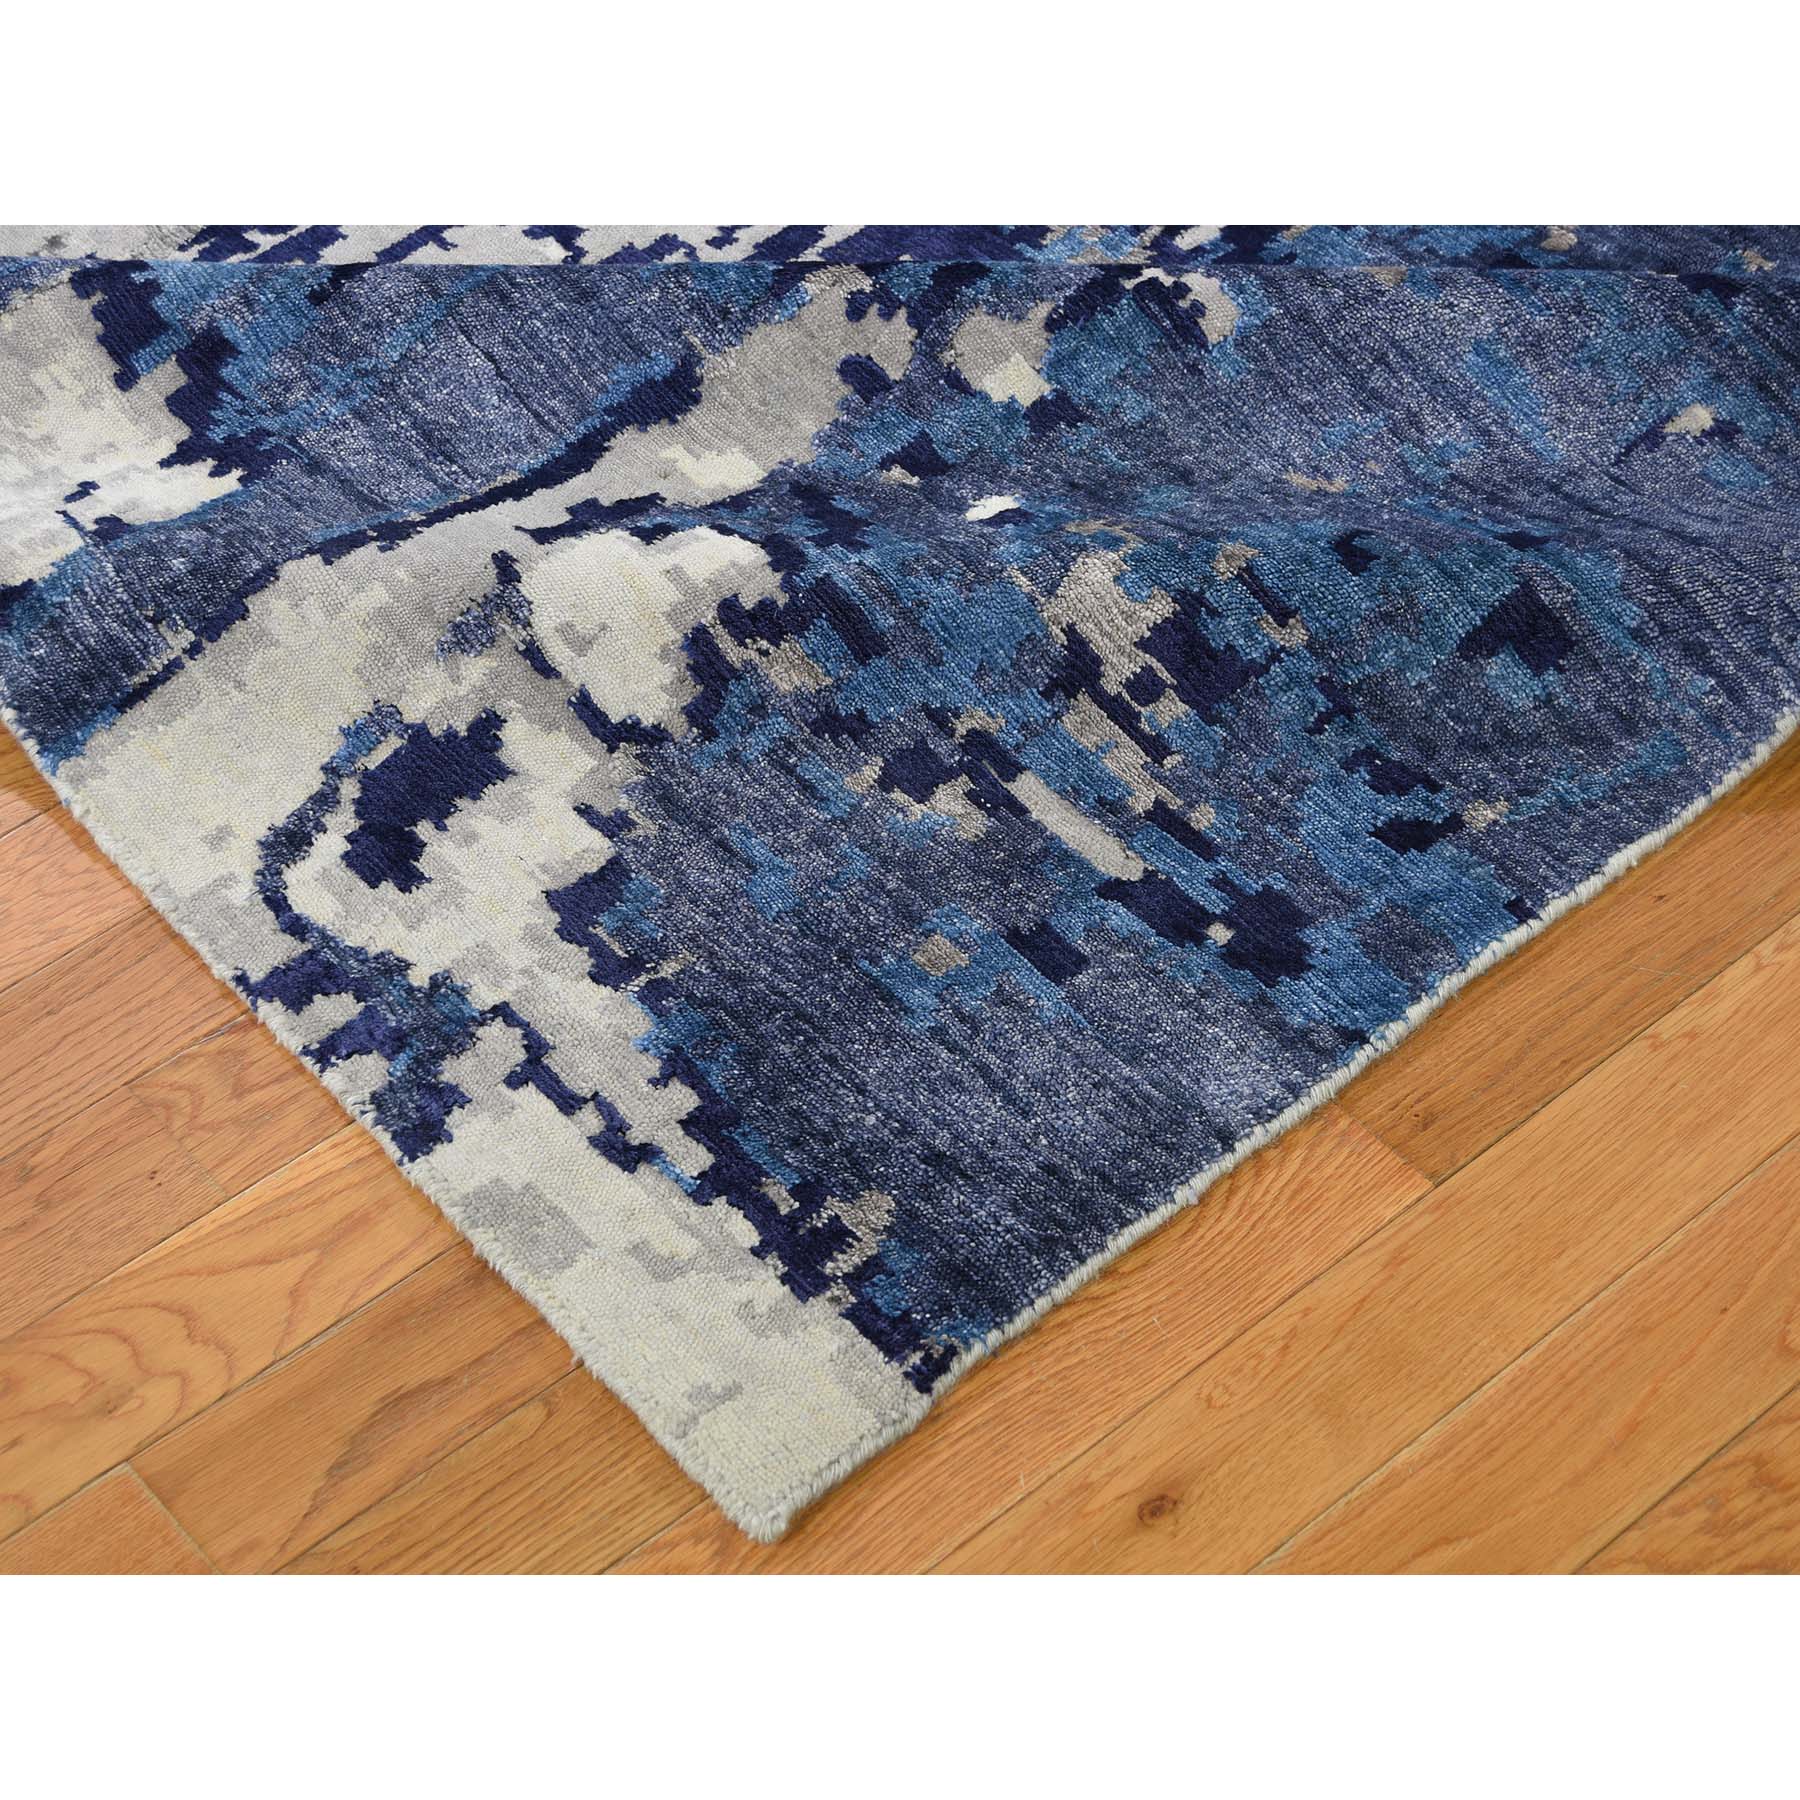 9-x12- High And Low Pile Abstract Design Wool And Silk Hand-Knotted Oriental Rug 